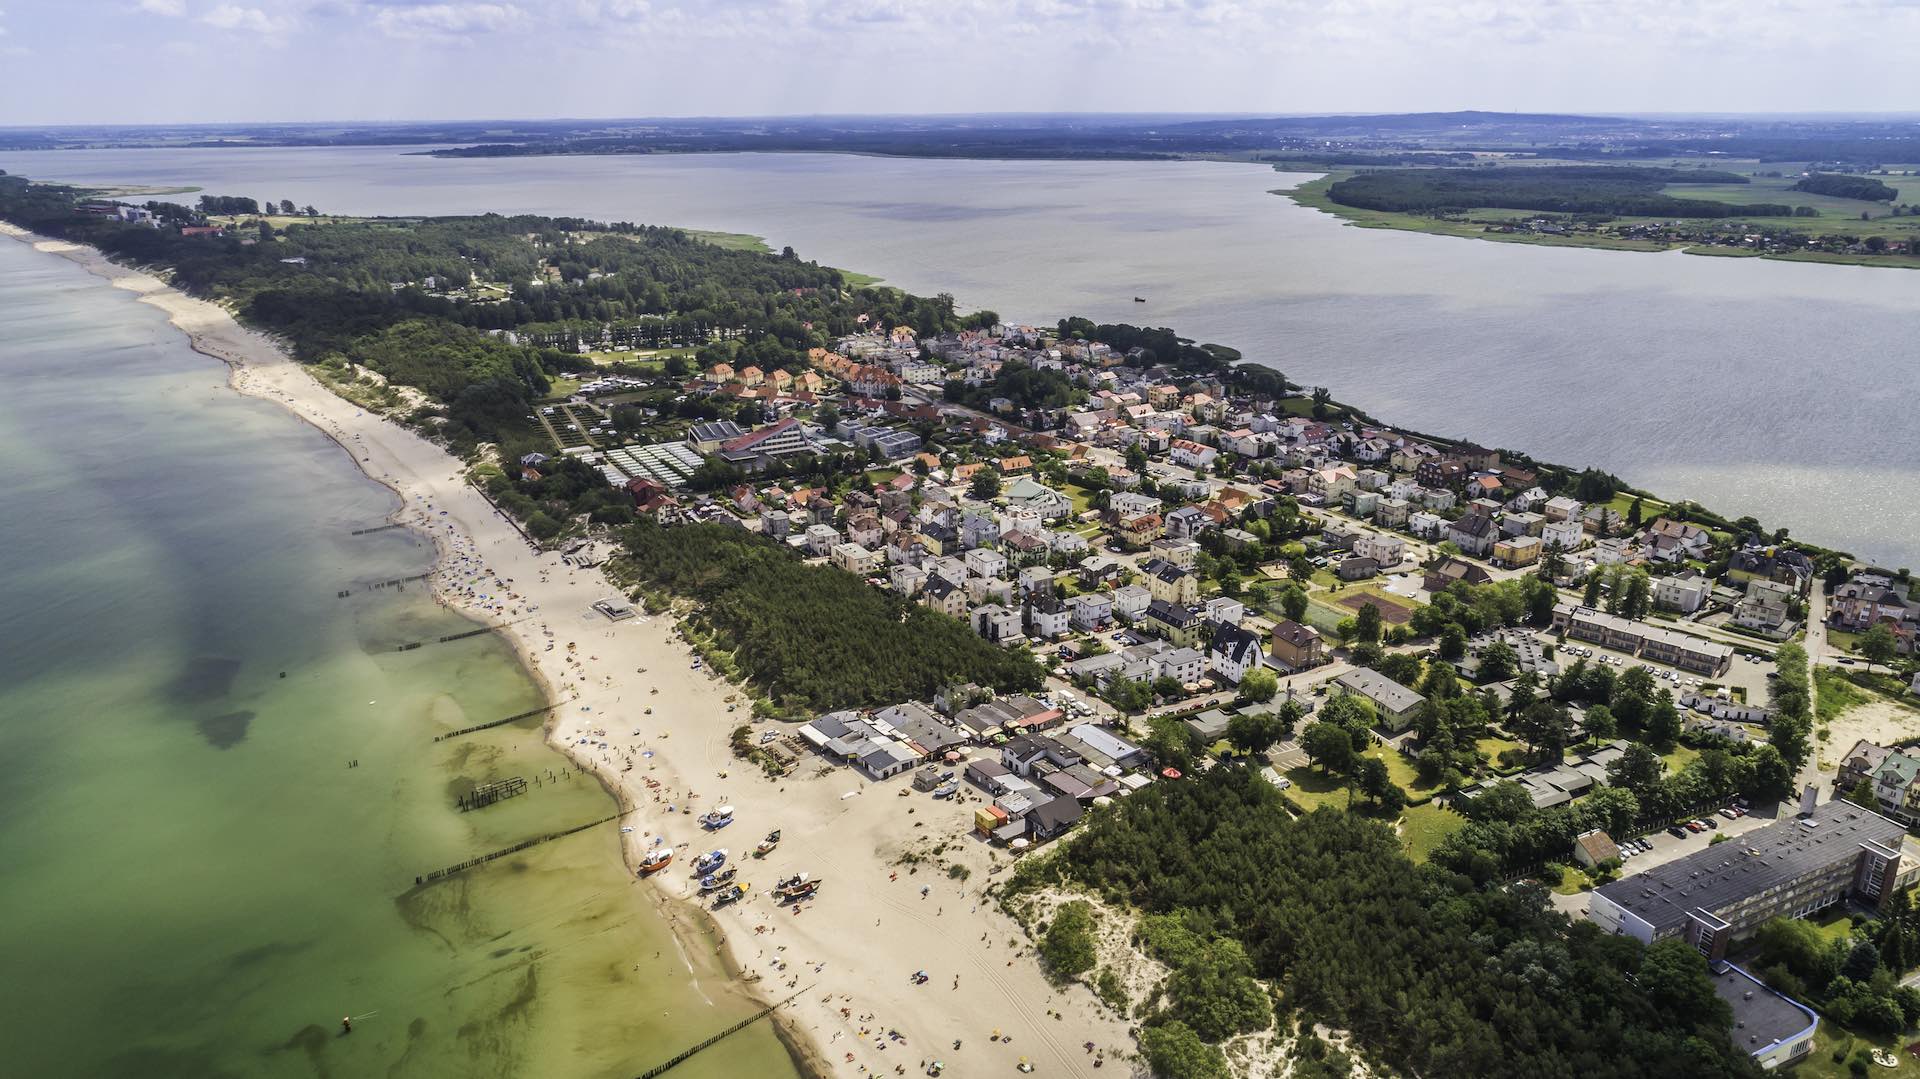 What Makes Poland’s Top 5 Beach Havens So Special